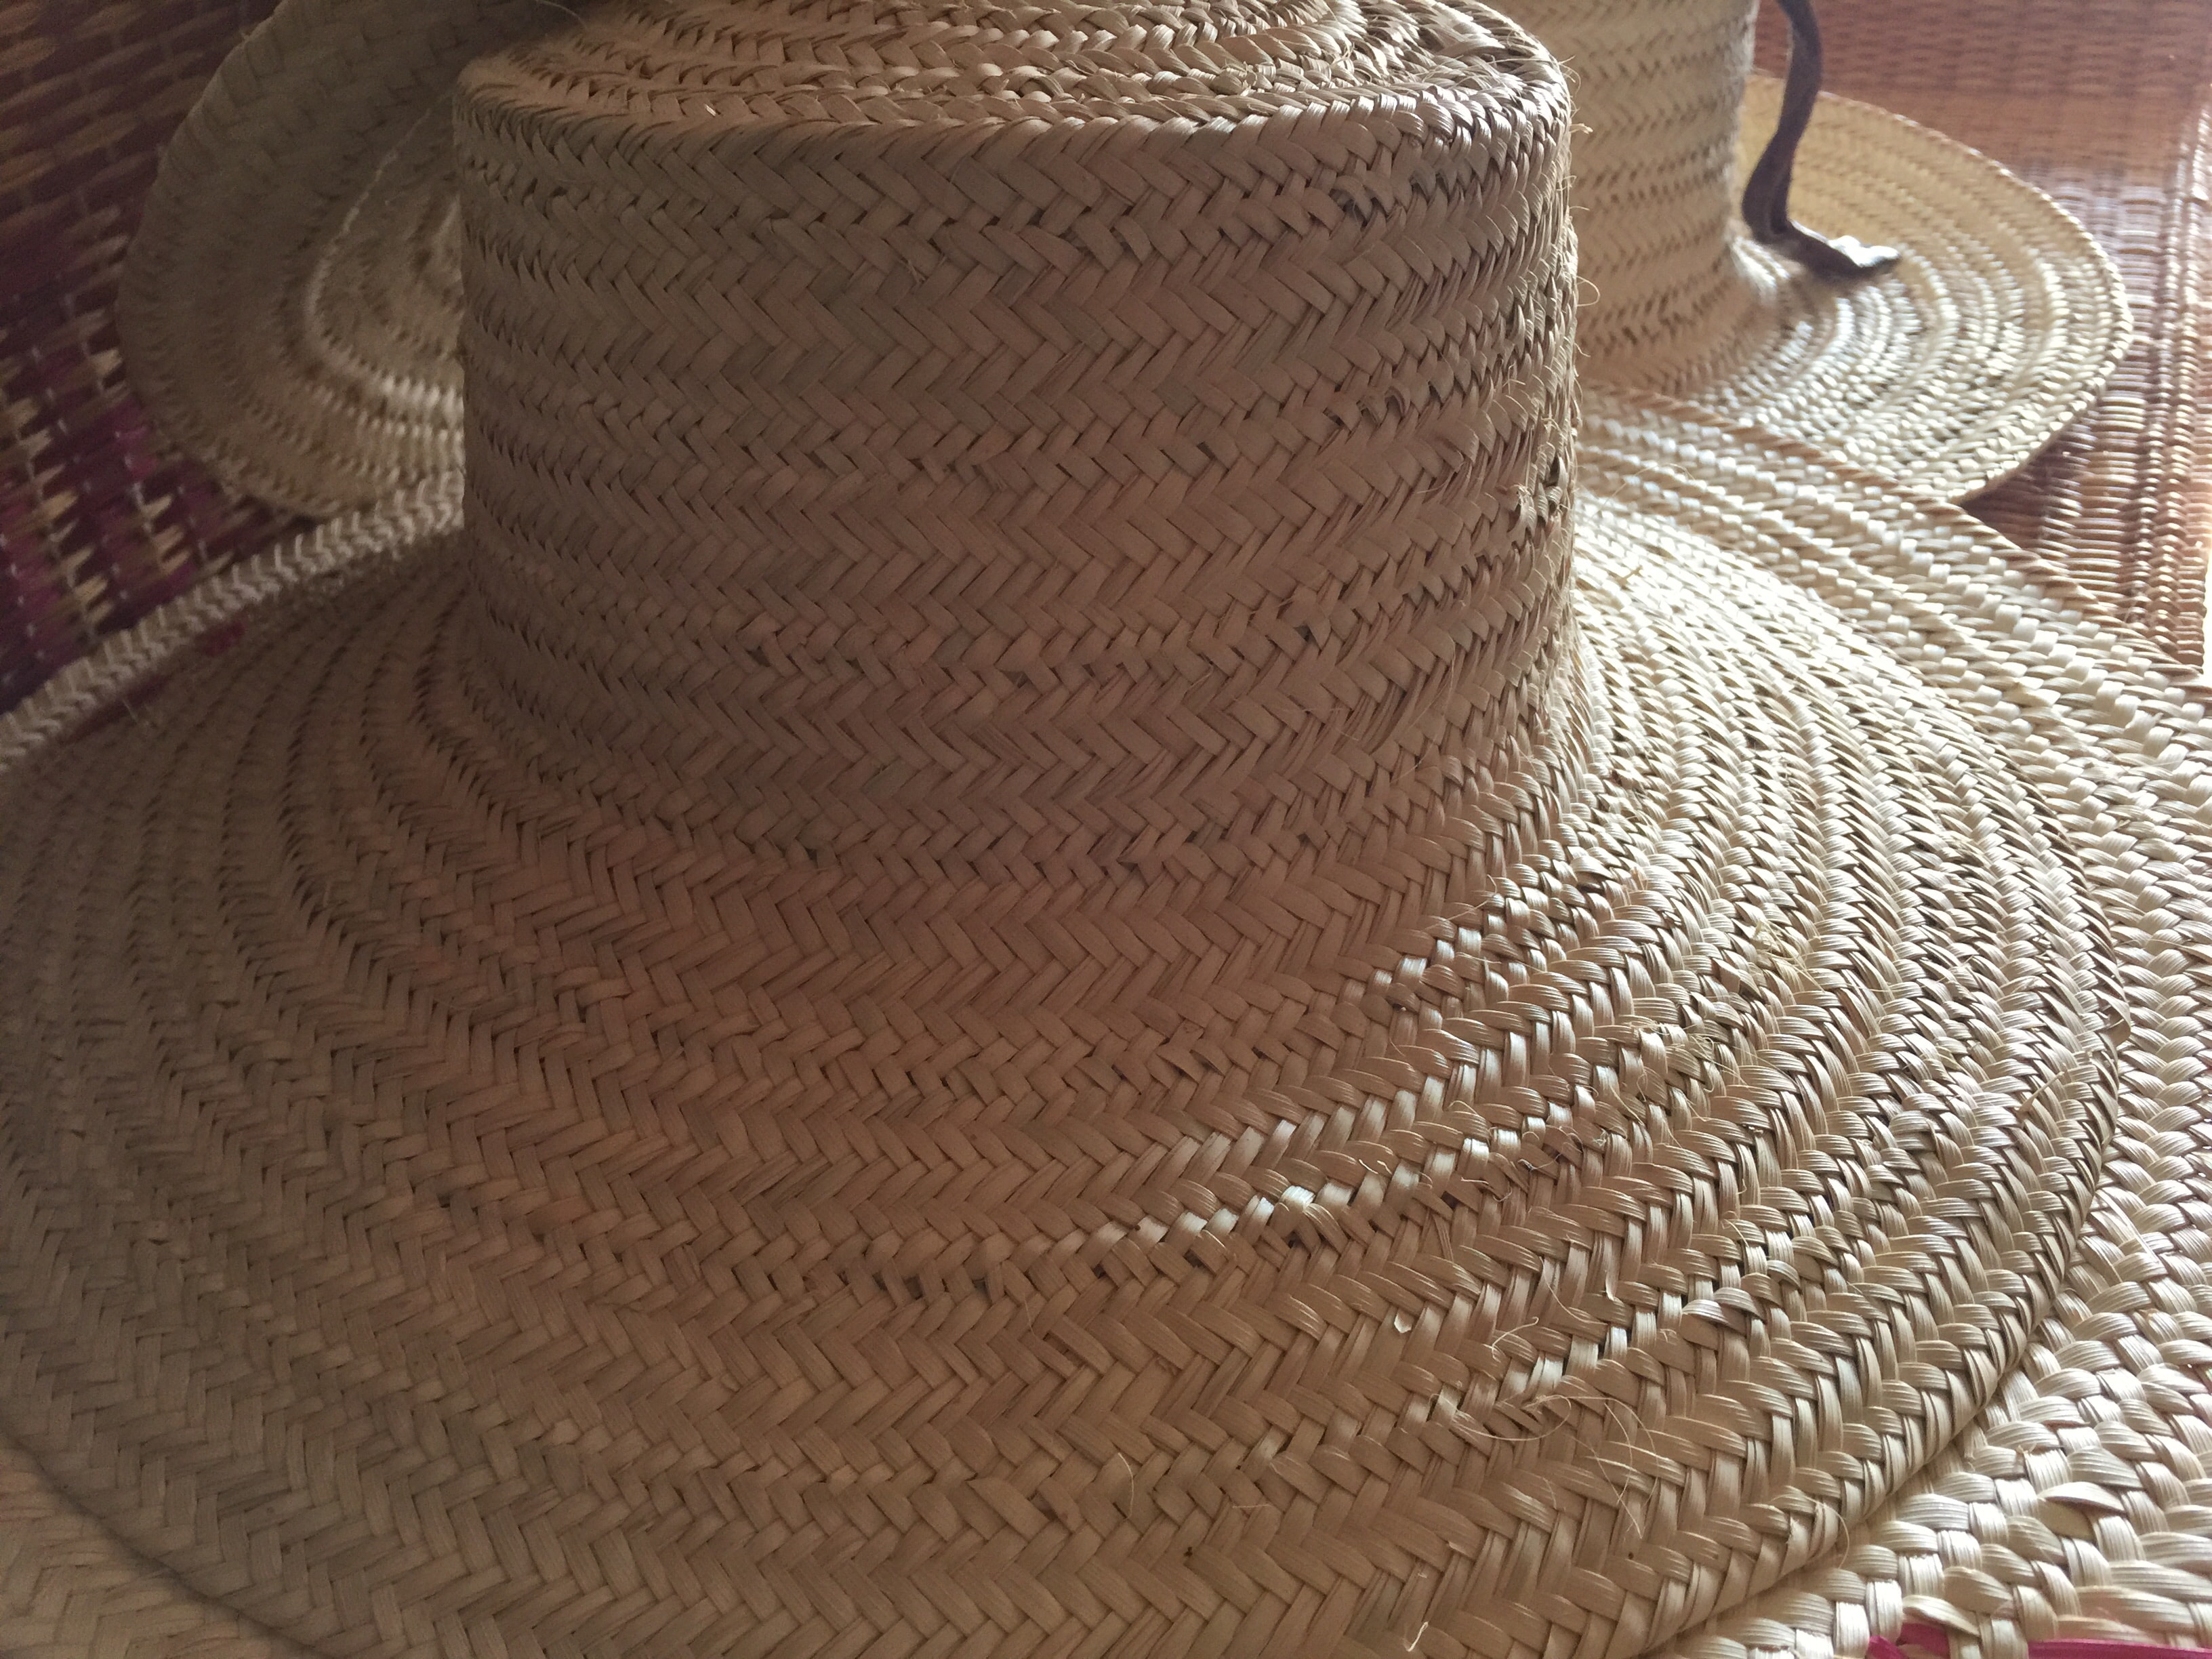 Tunisian Basketry — Hat Detail